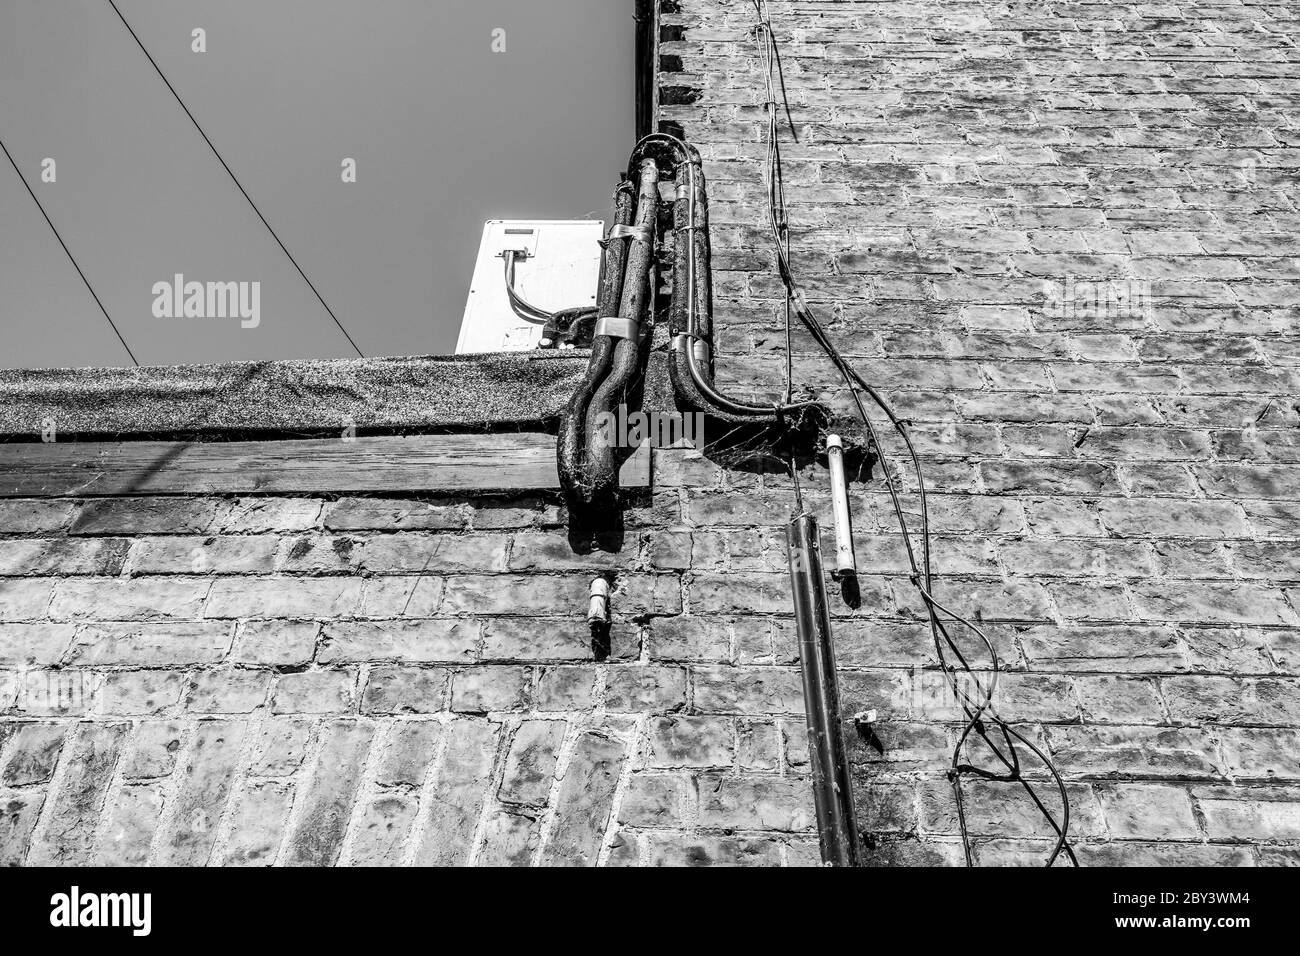 Vertical, monochrome view of current and old pipes including an air conditioning unit seen atop of a flat roof behind on old brick-built building. Stock Photo